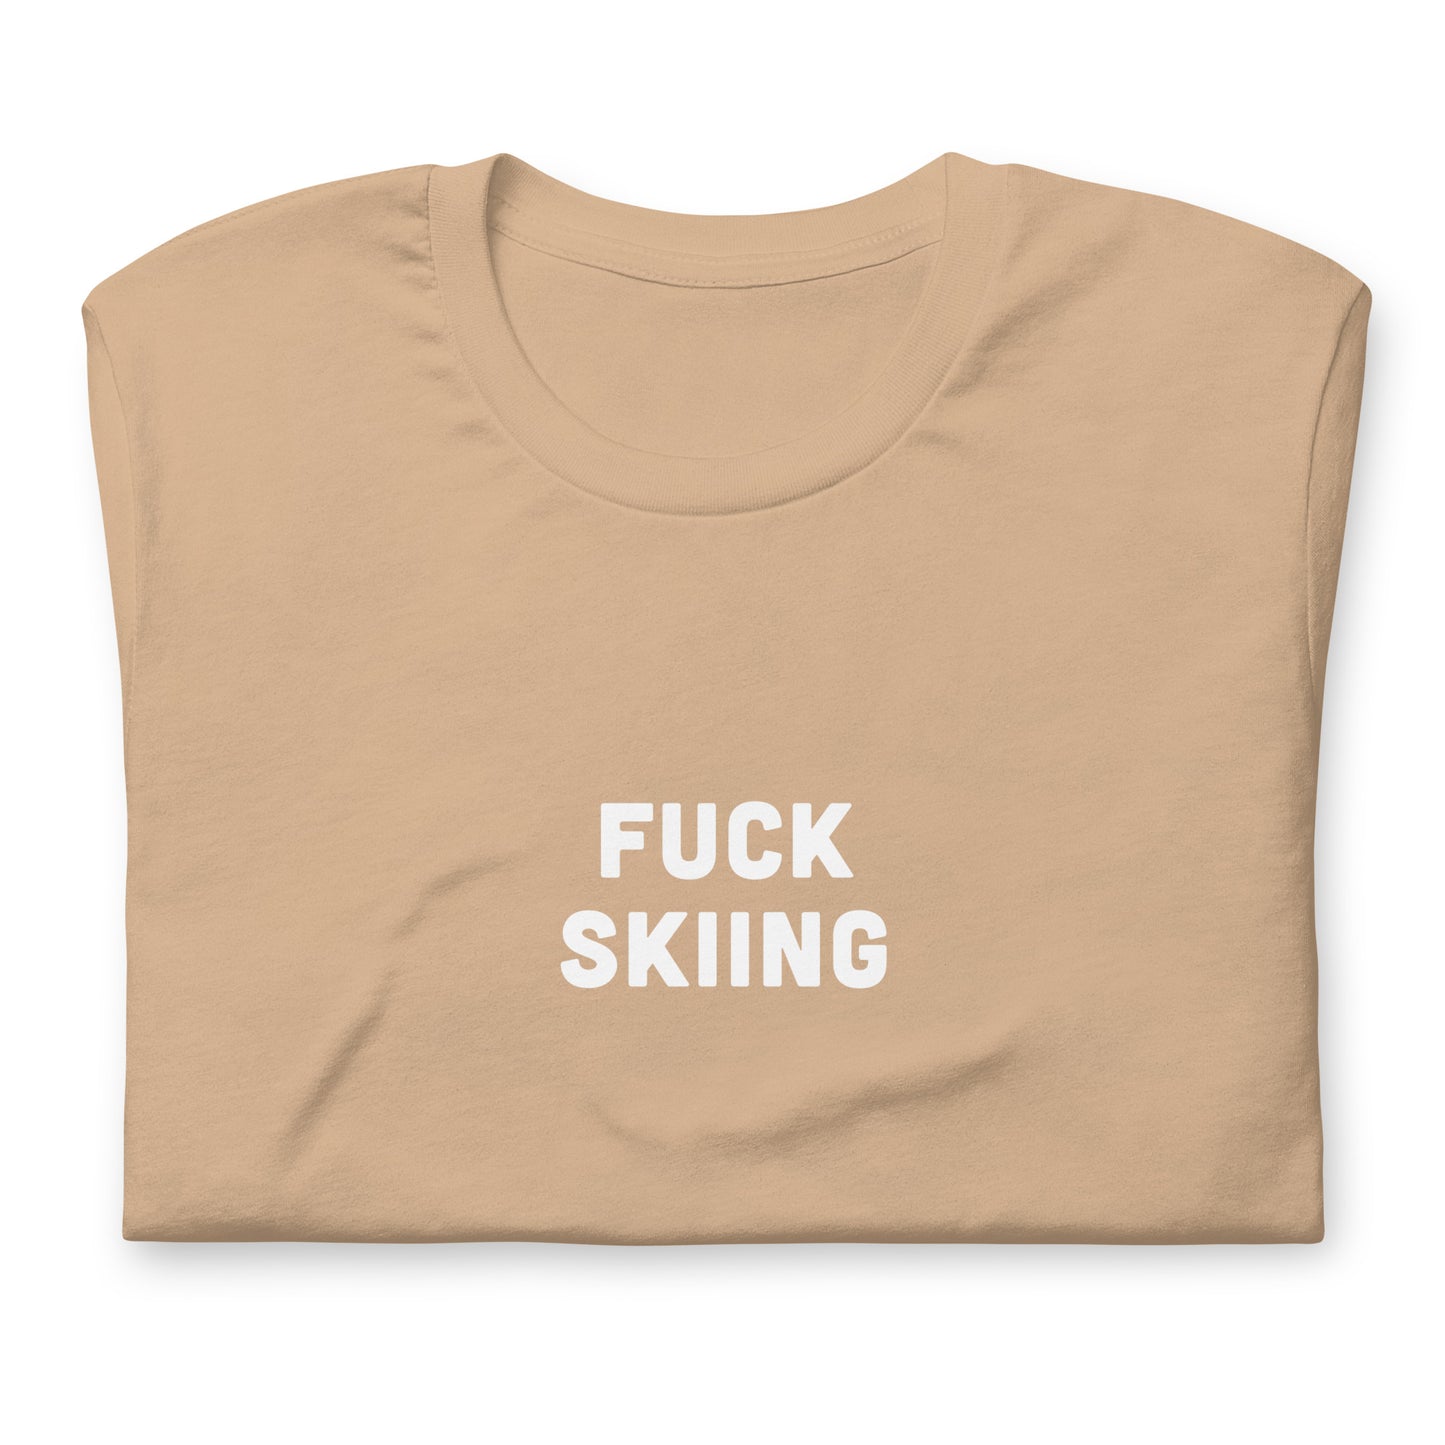 Fuck Skiing T-Shirt Size XL Color Forest